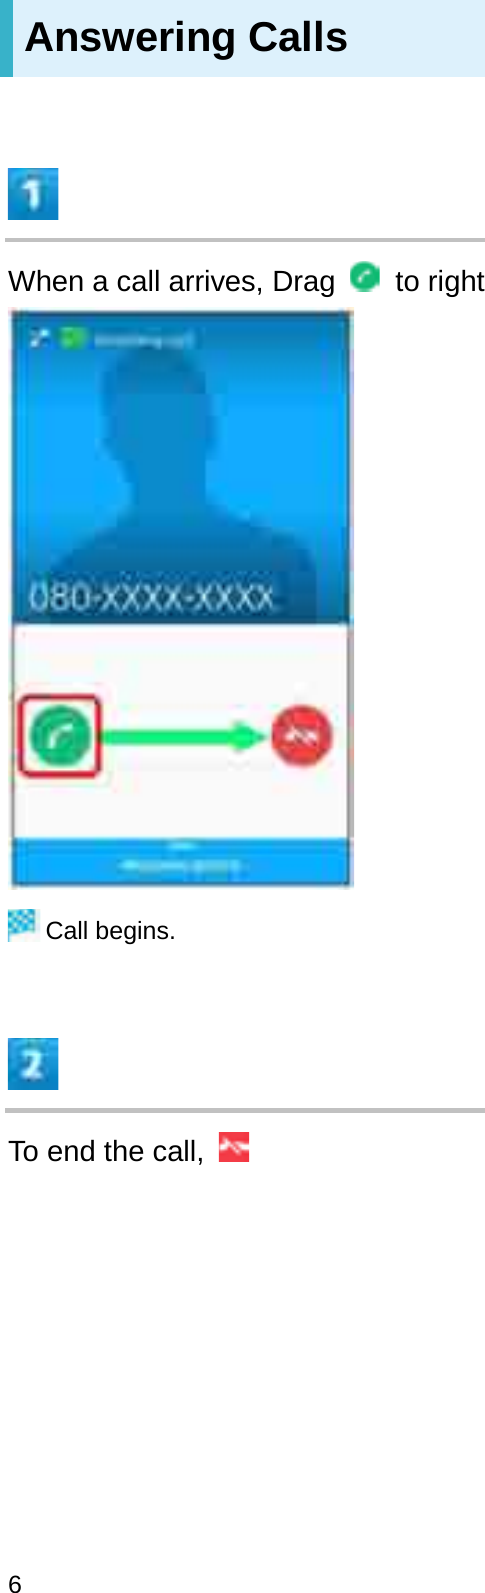 Answering CallsWhen a call arrives, Drag  to rightCall begins.To end the call, 6